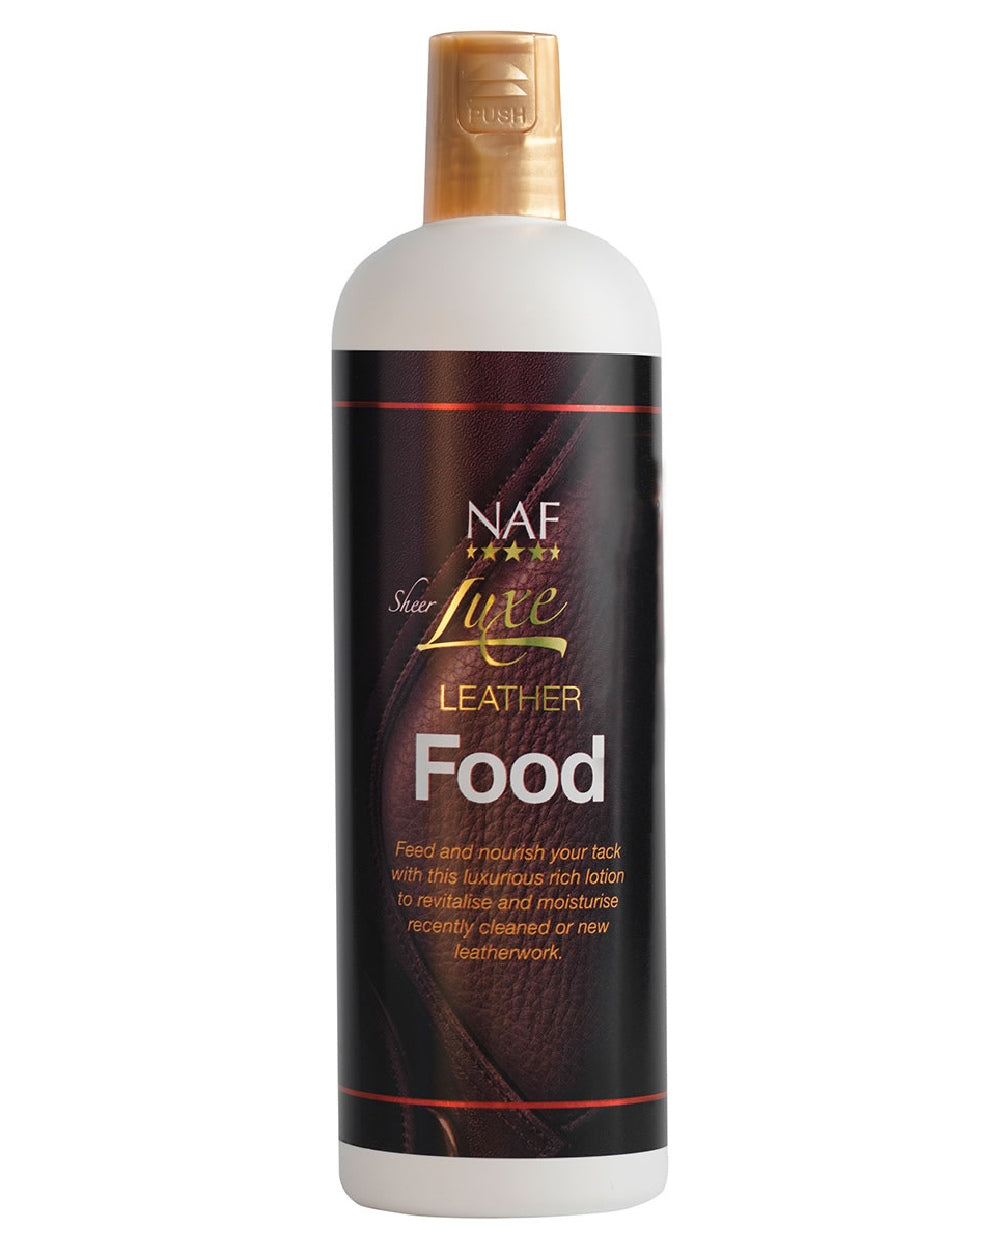 NAF Sheer Luxe Leather Food 500ml on white background